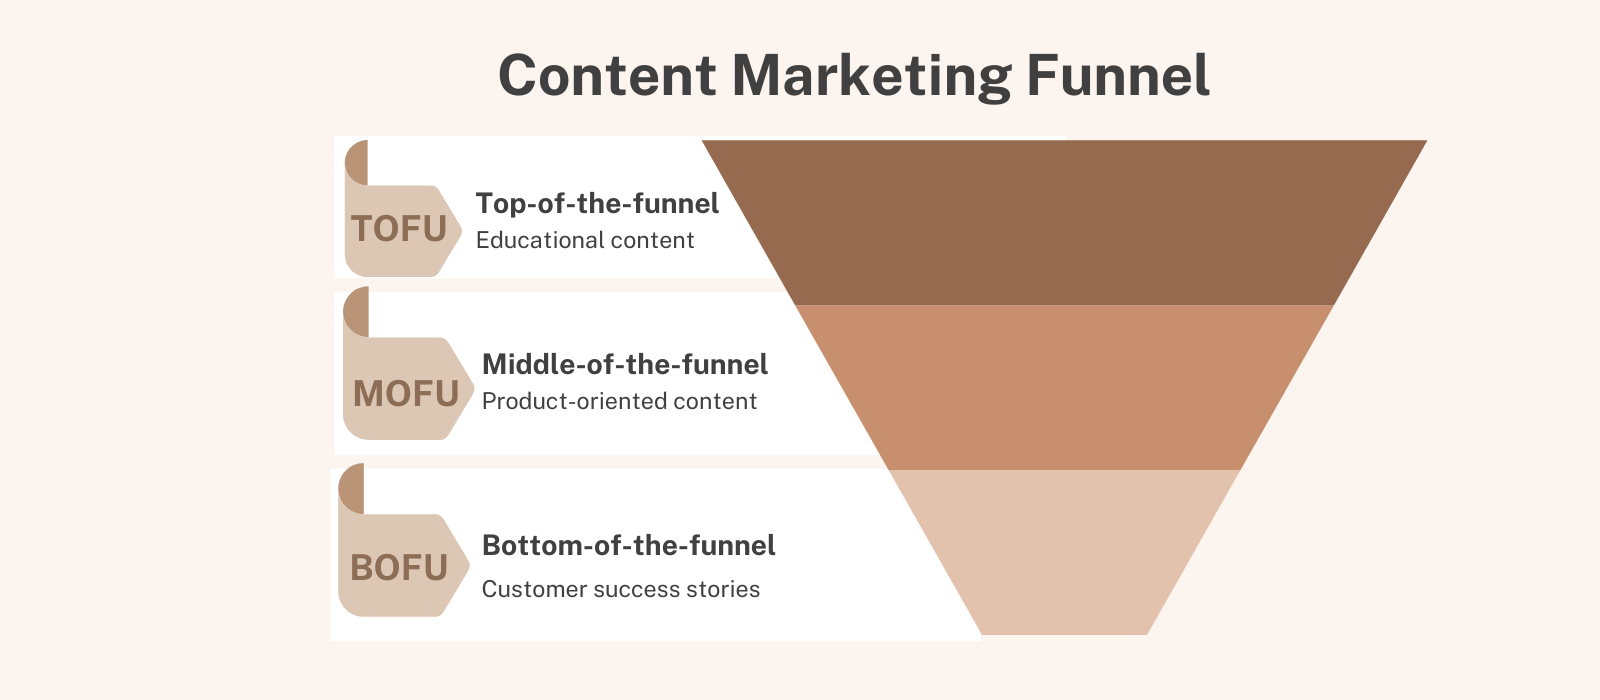 What Is The Content material Advertising and marketing Funnel?